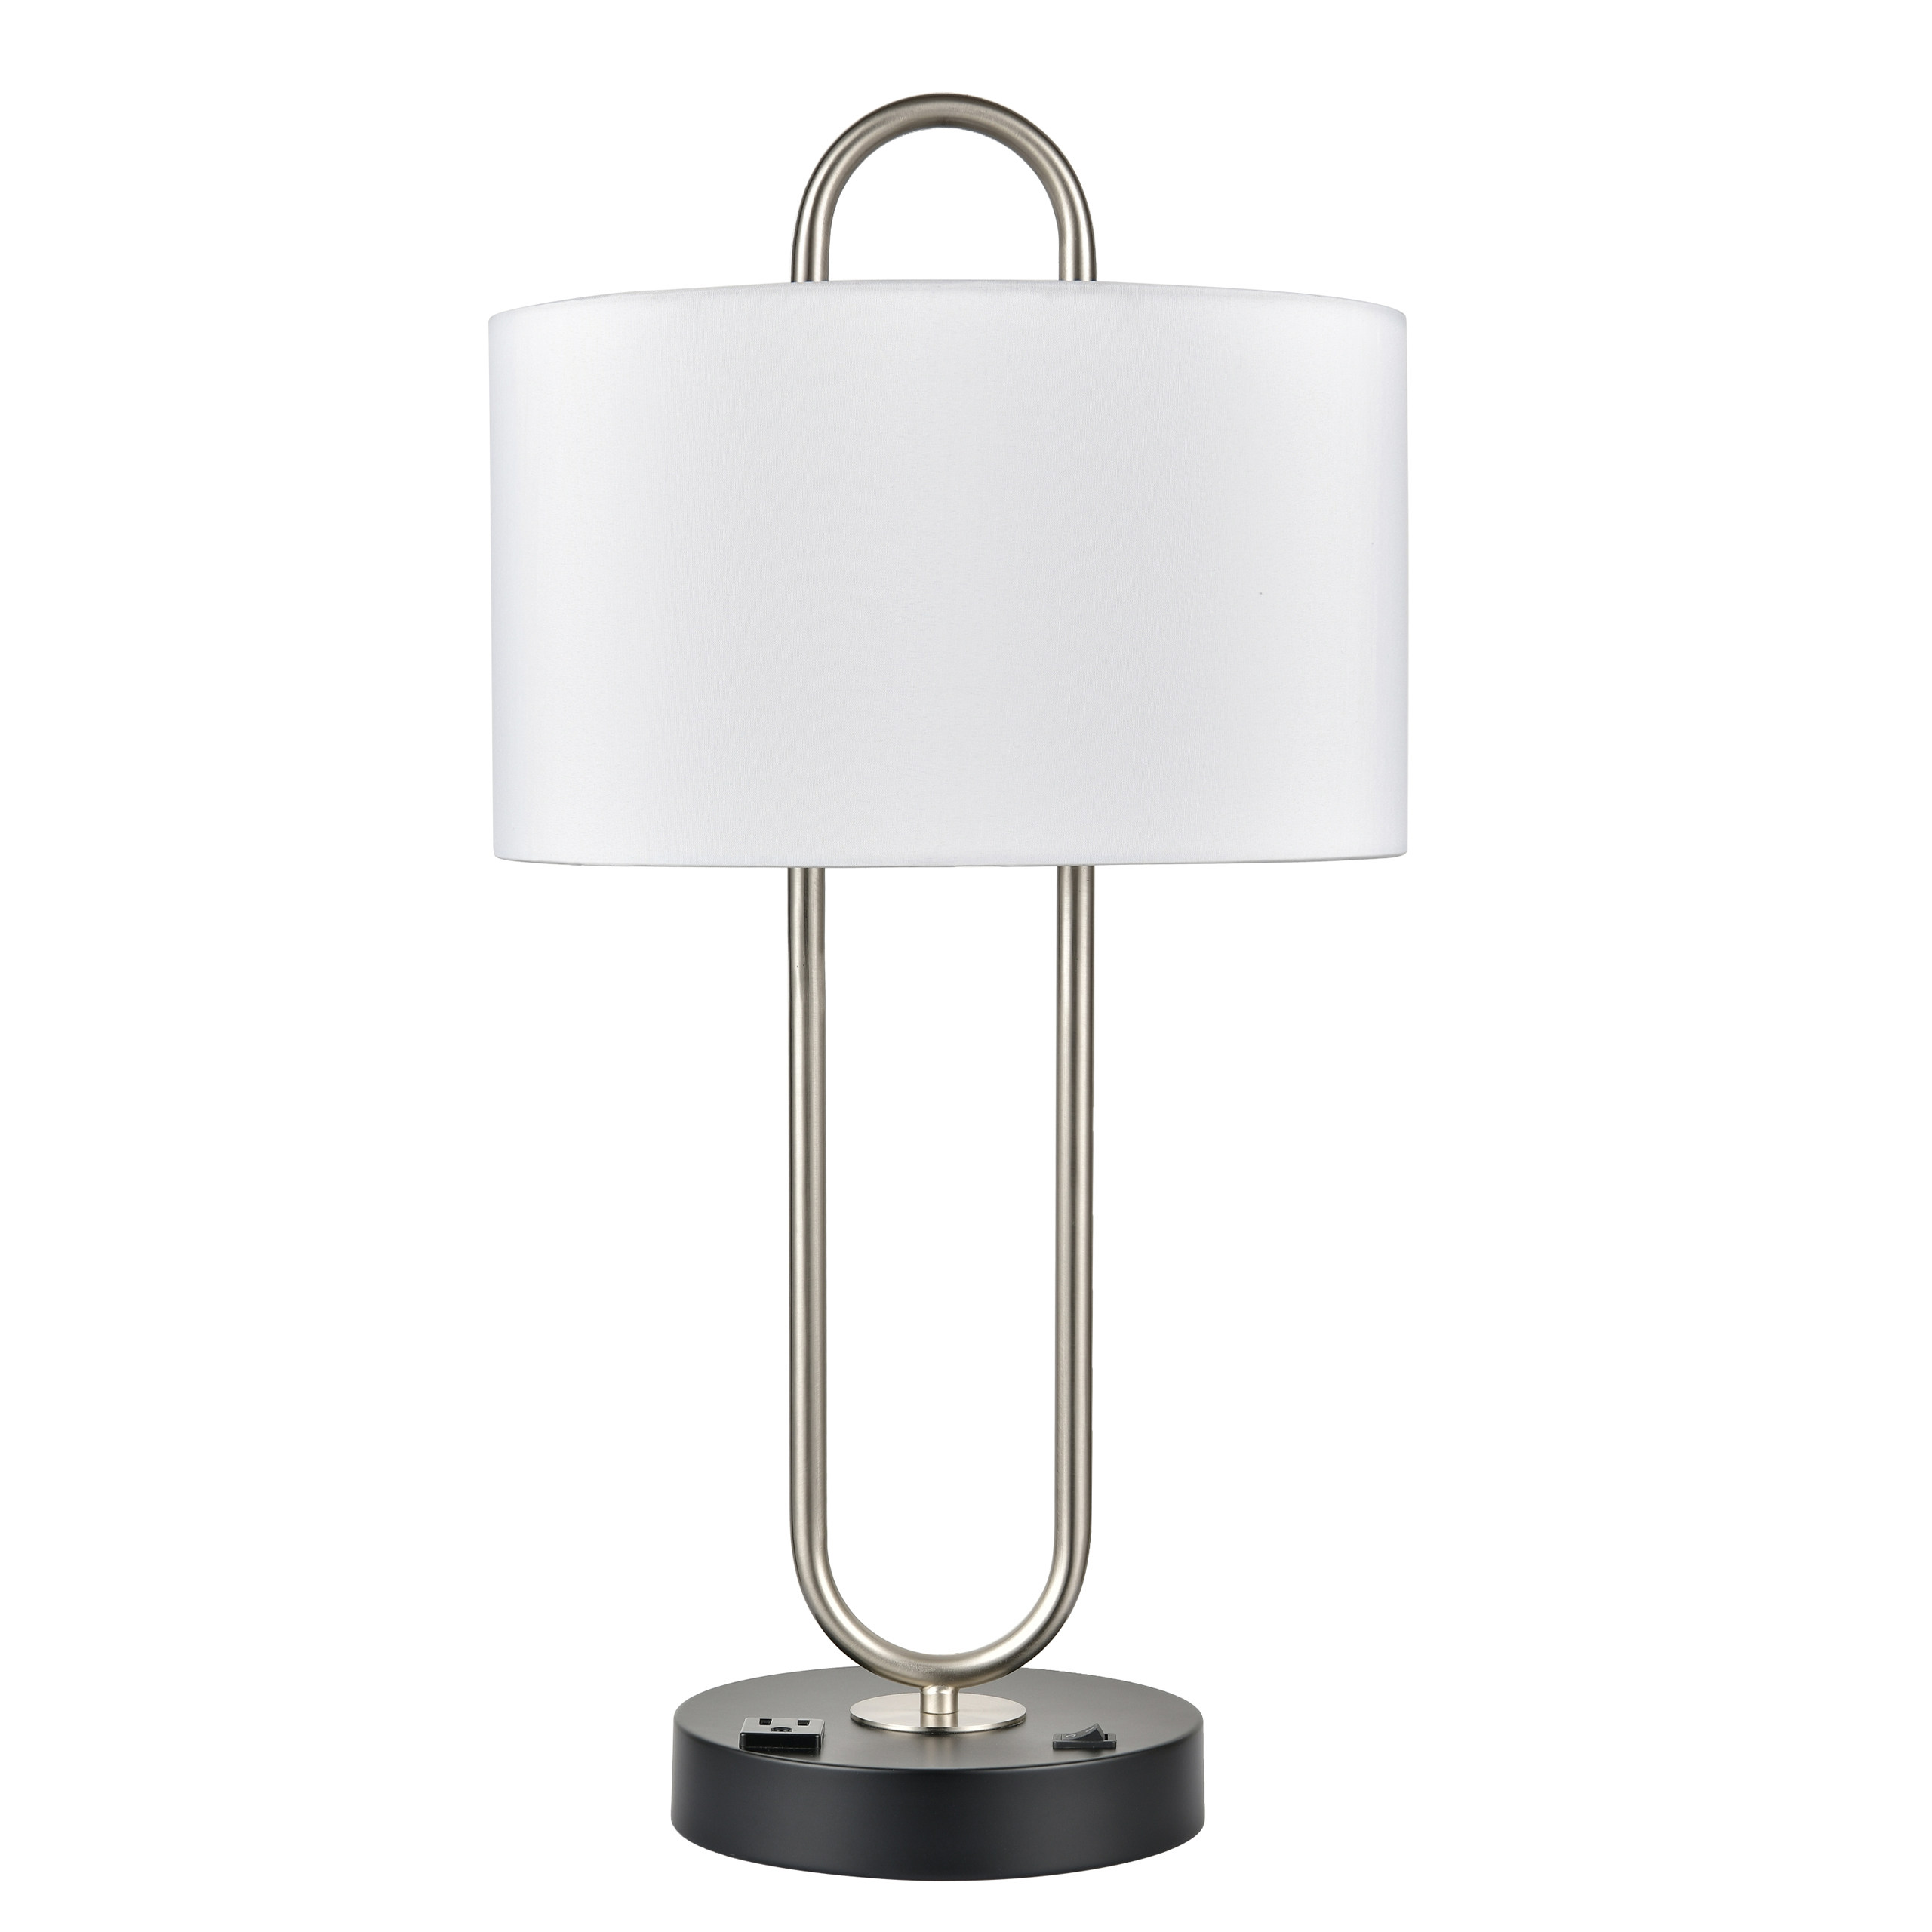 Table Lamp Brushed Nickel Powder Coated Matte Black Without USB